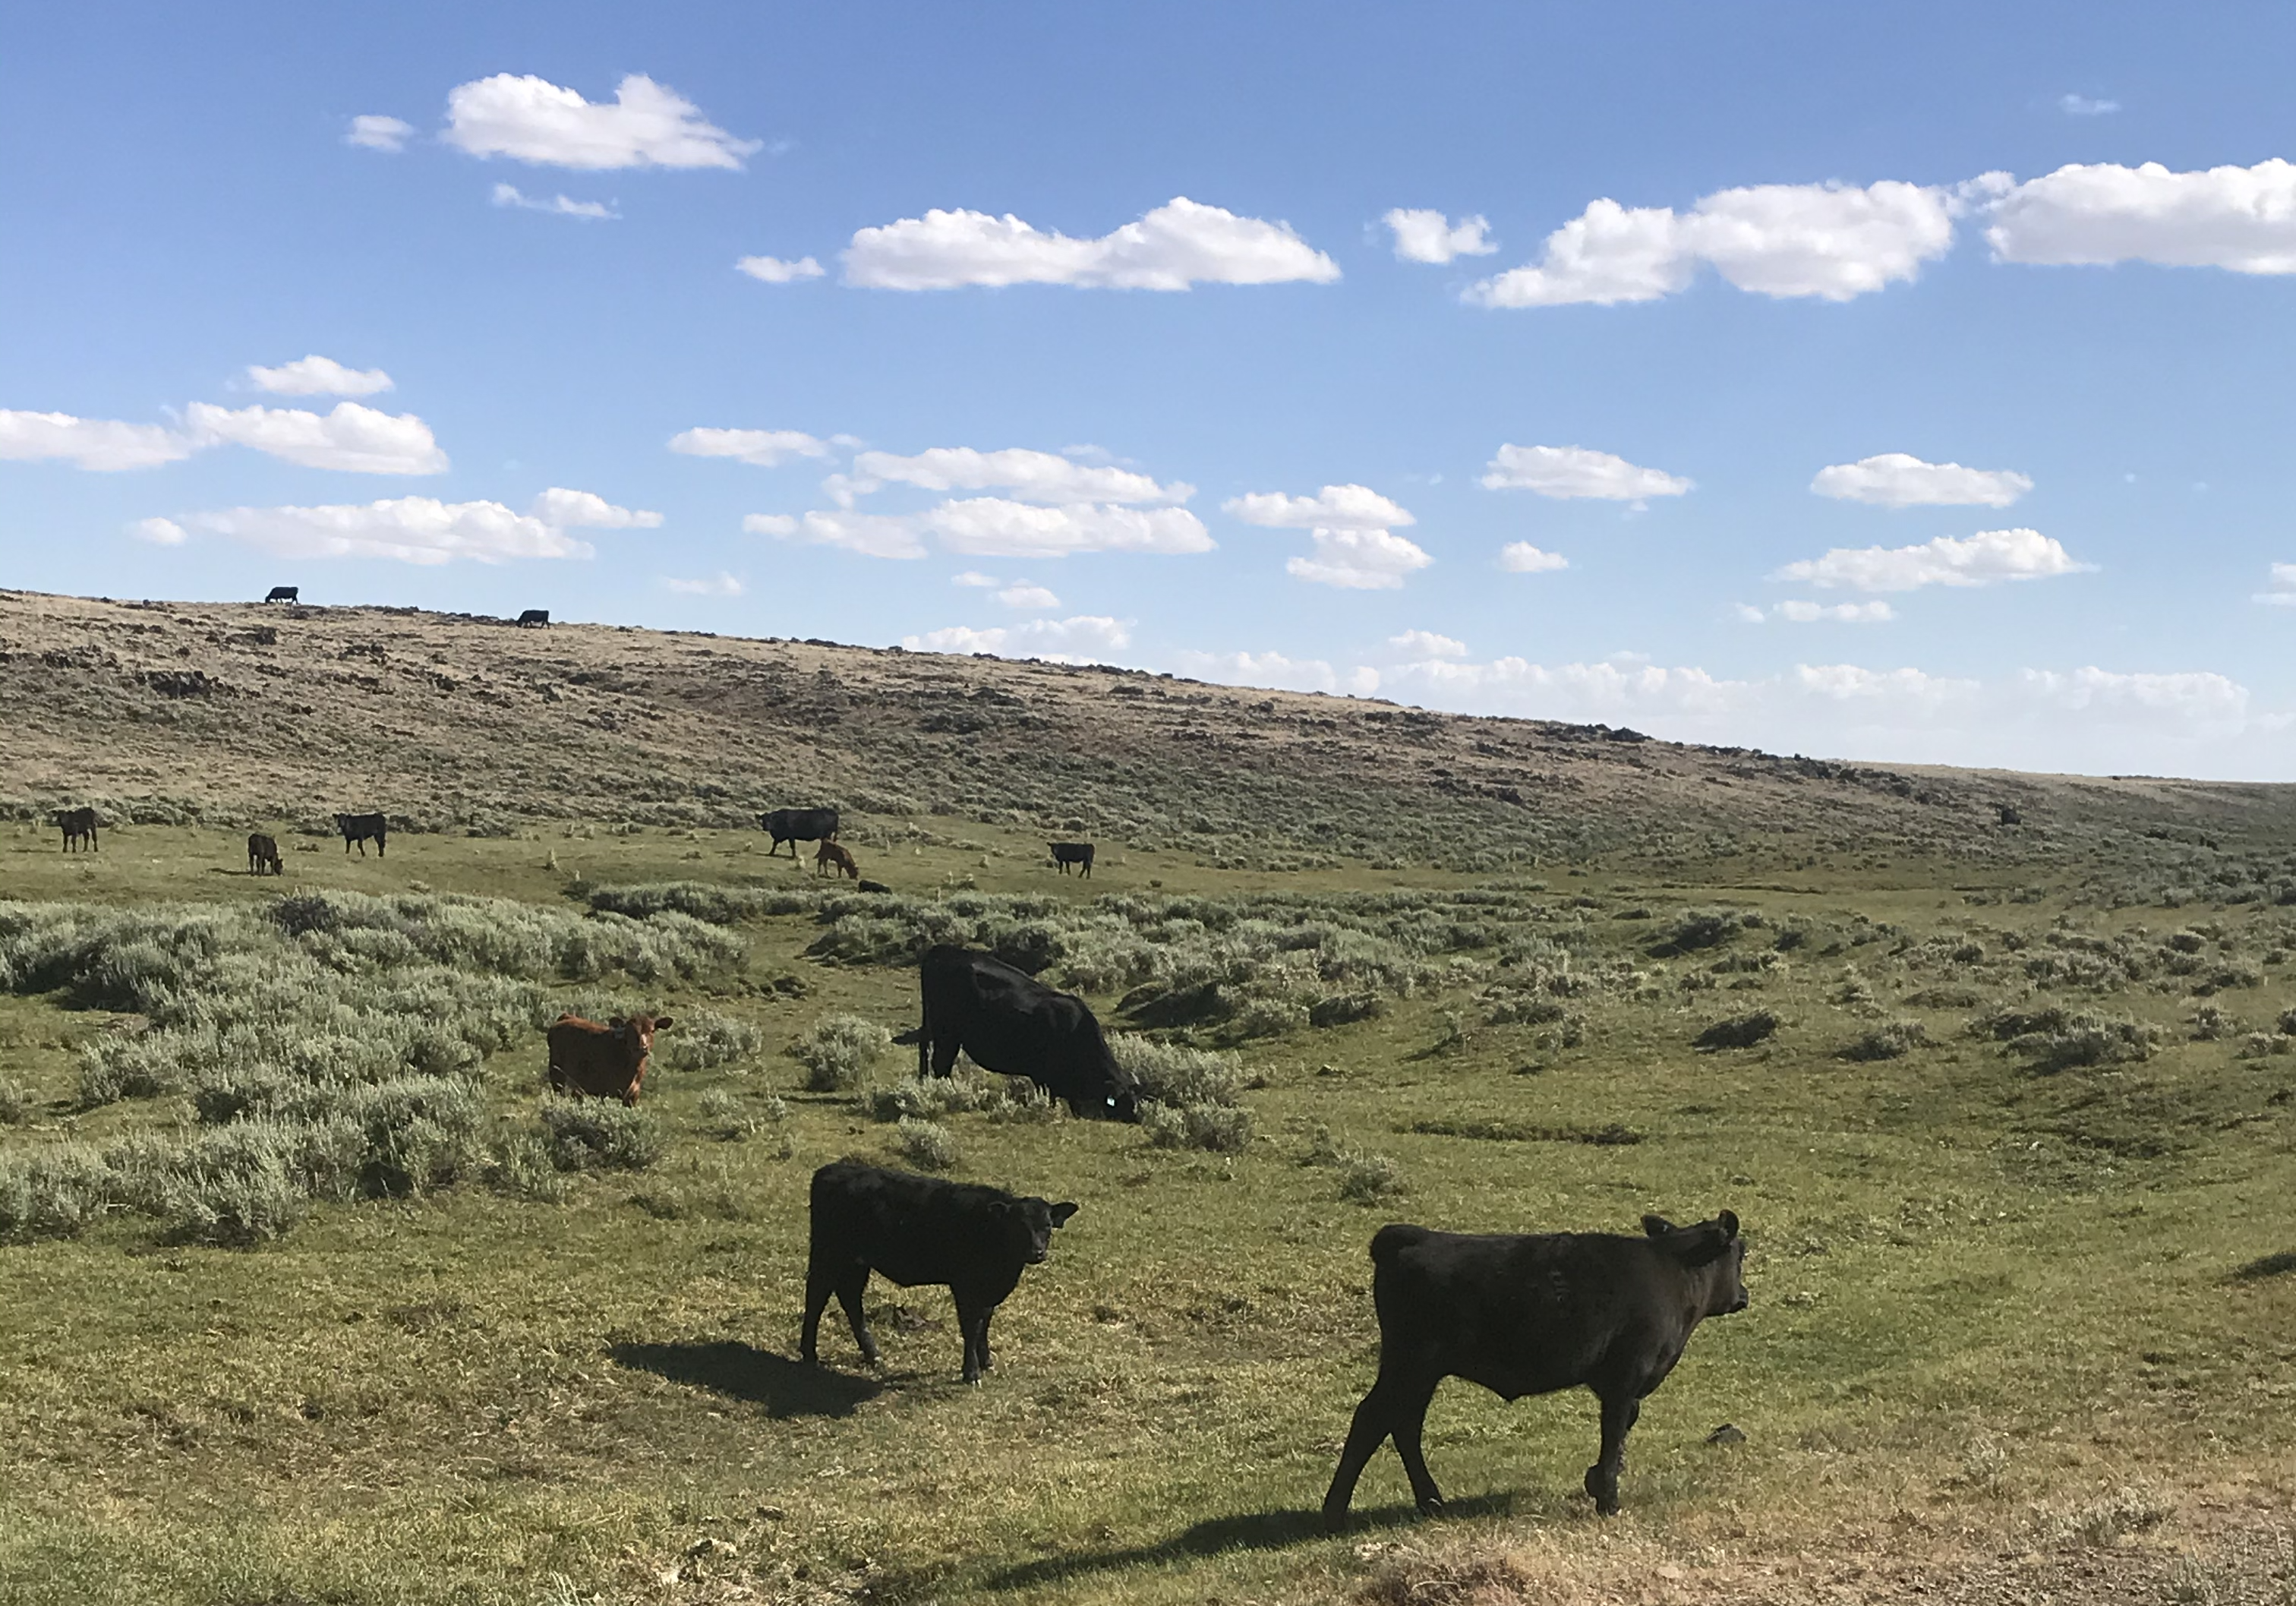 Lummis, Colleagues, Introduce Legislation to Protect WY Agriculture Industry